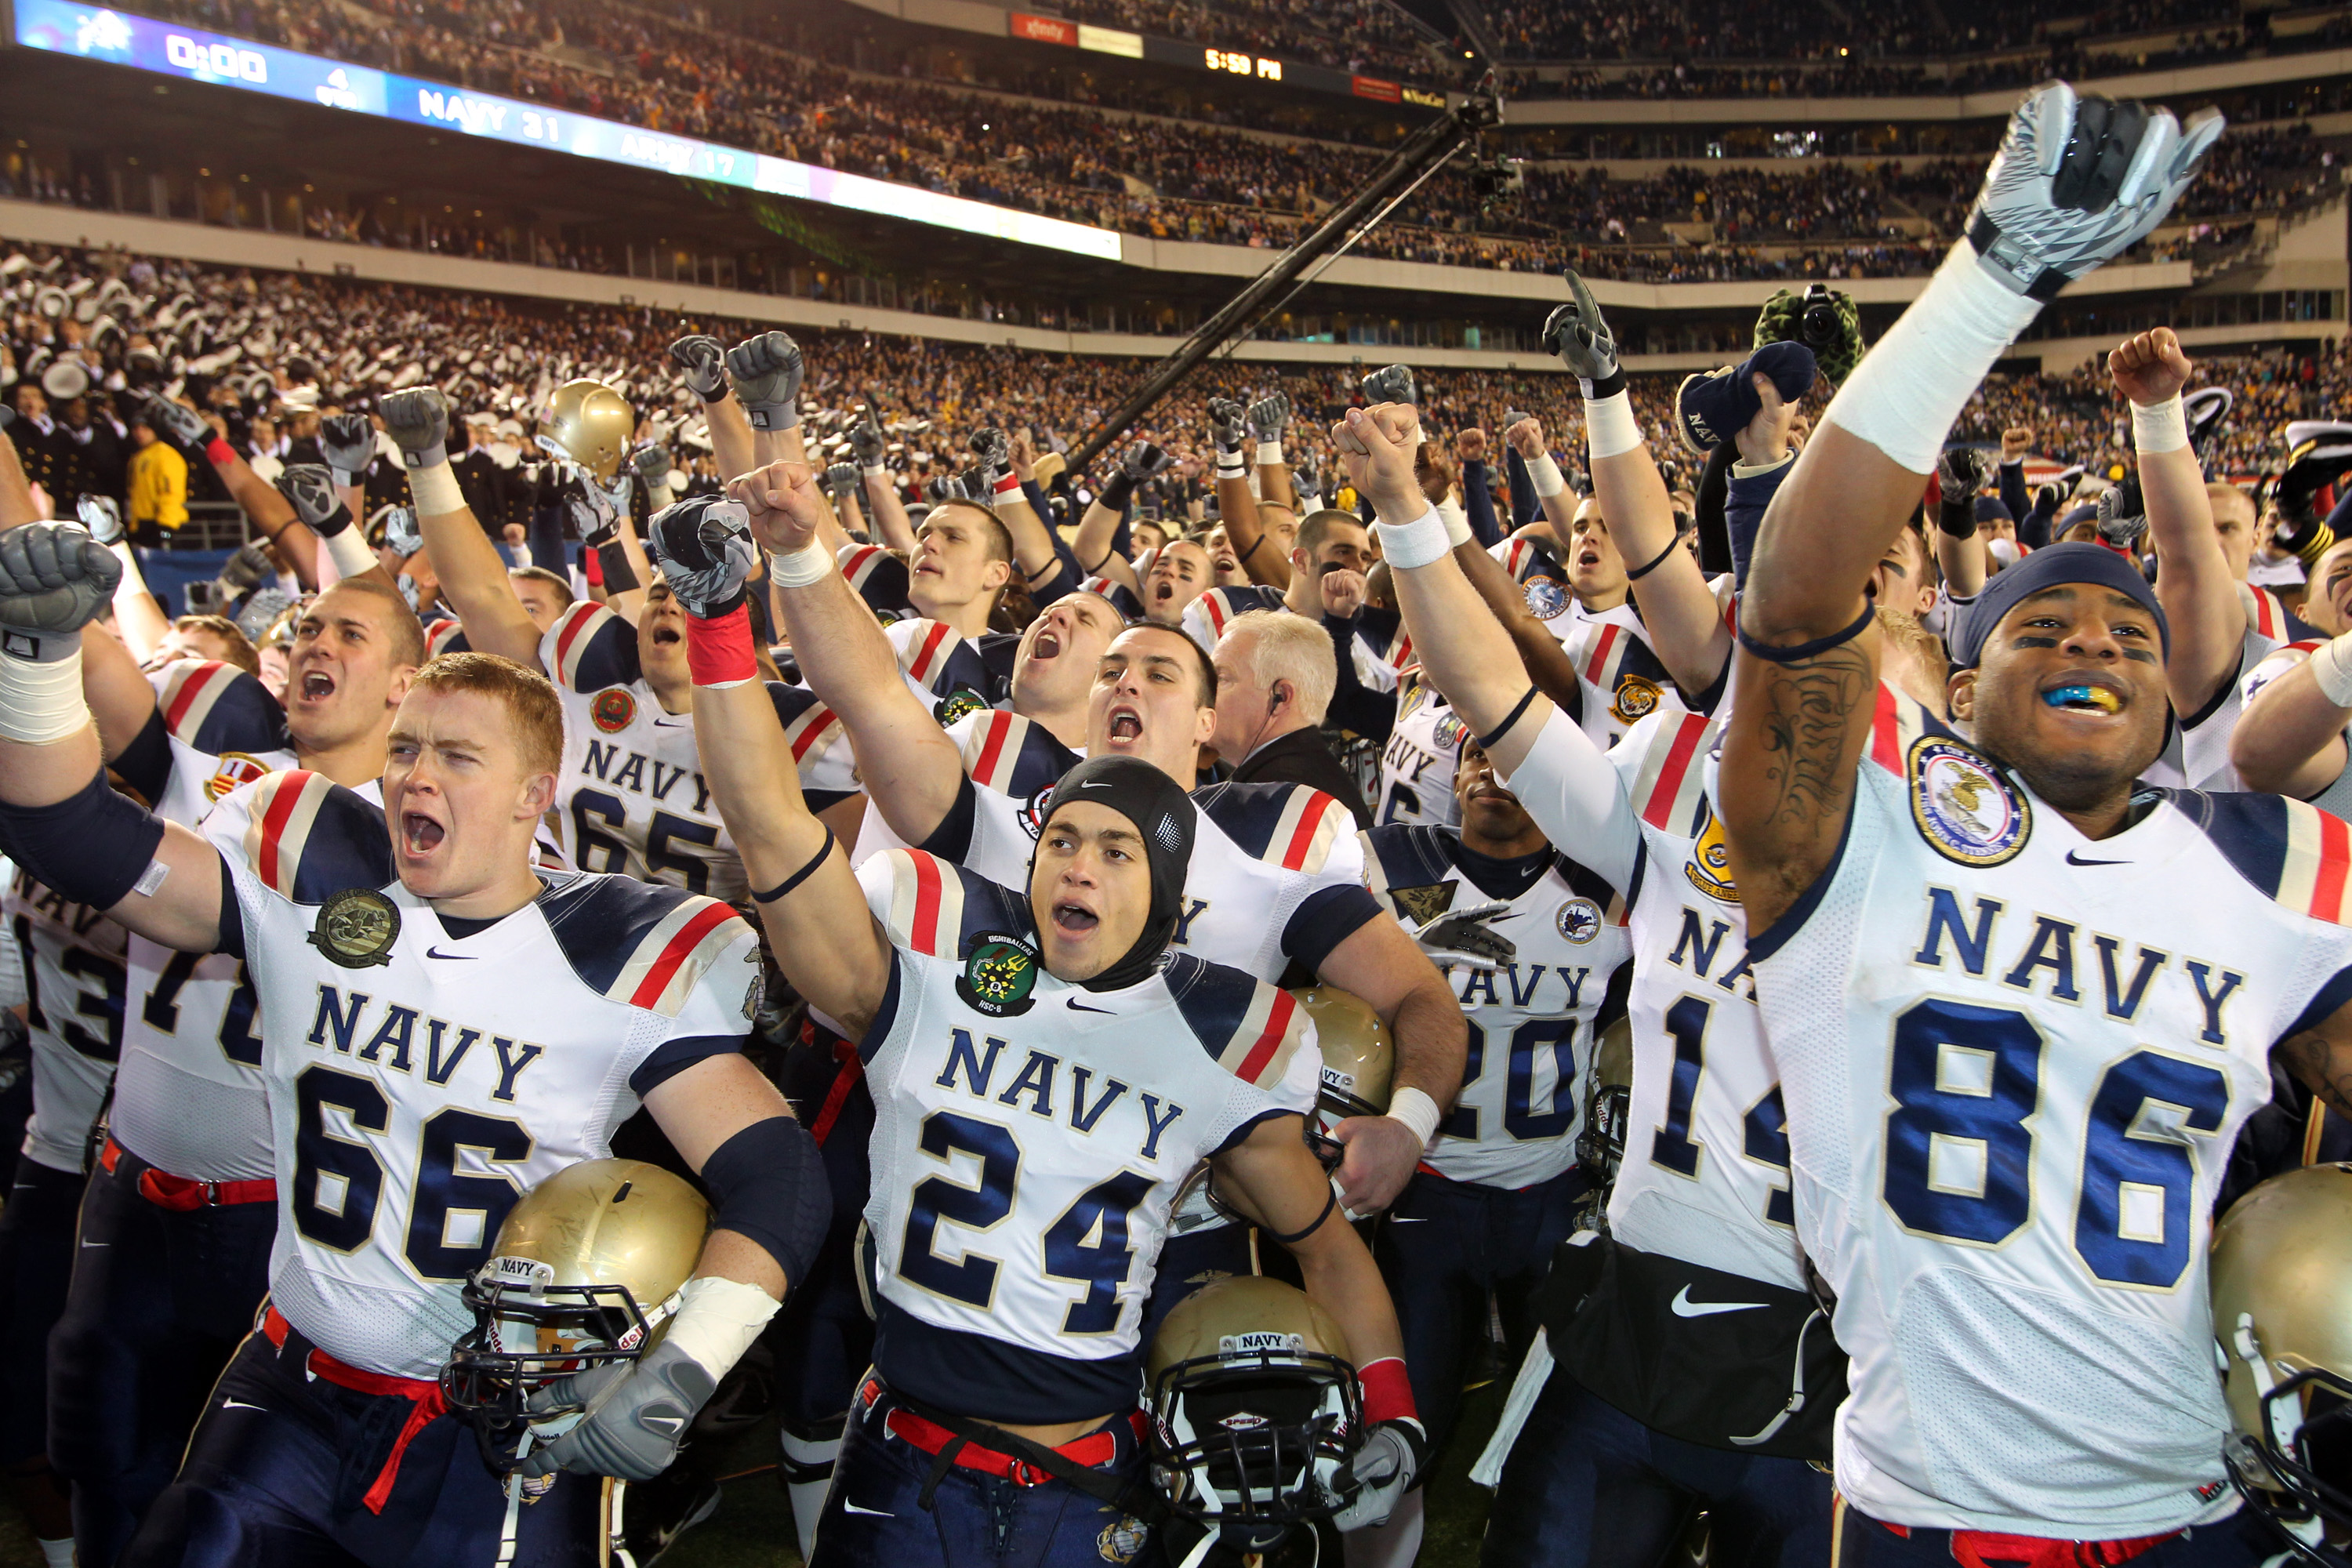 PHILADELPHIA - DECEMBER 11: The Navy Midshipmen celebrate their victory after a game against the Army Black Knights on December 11, 2010 at Lincoln Financial Field in Philadelphia, Pennsylvania. The Midshipmen won 31-17. (Photo by Hunter Martin/Getty Imag